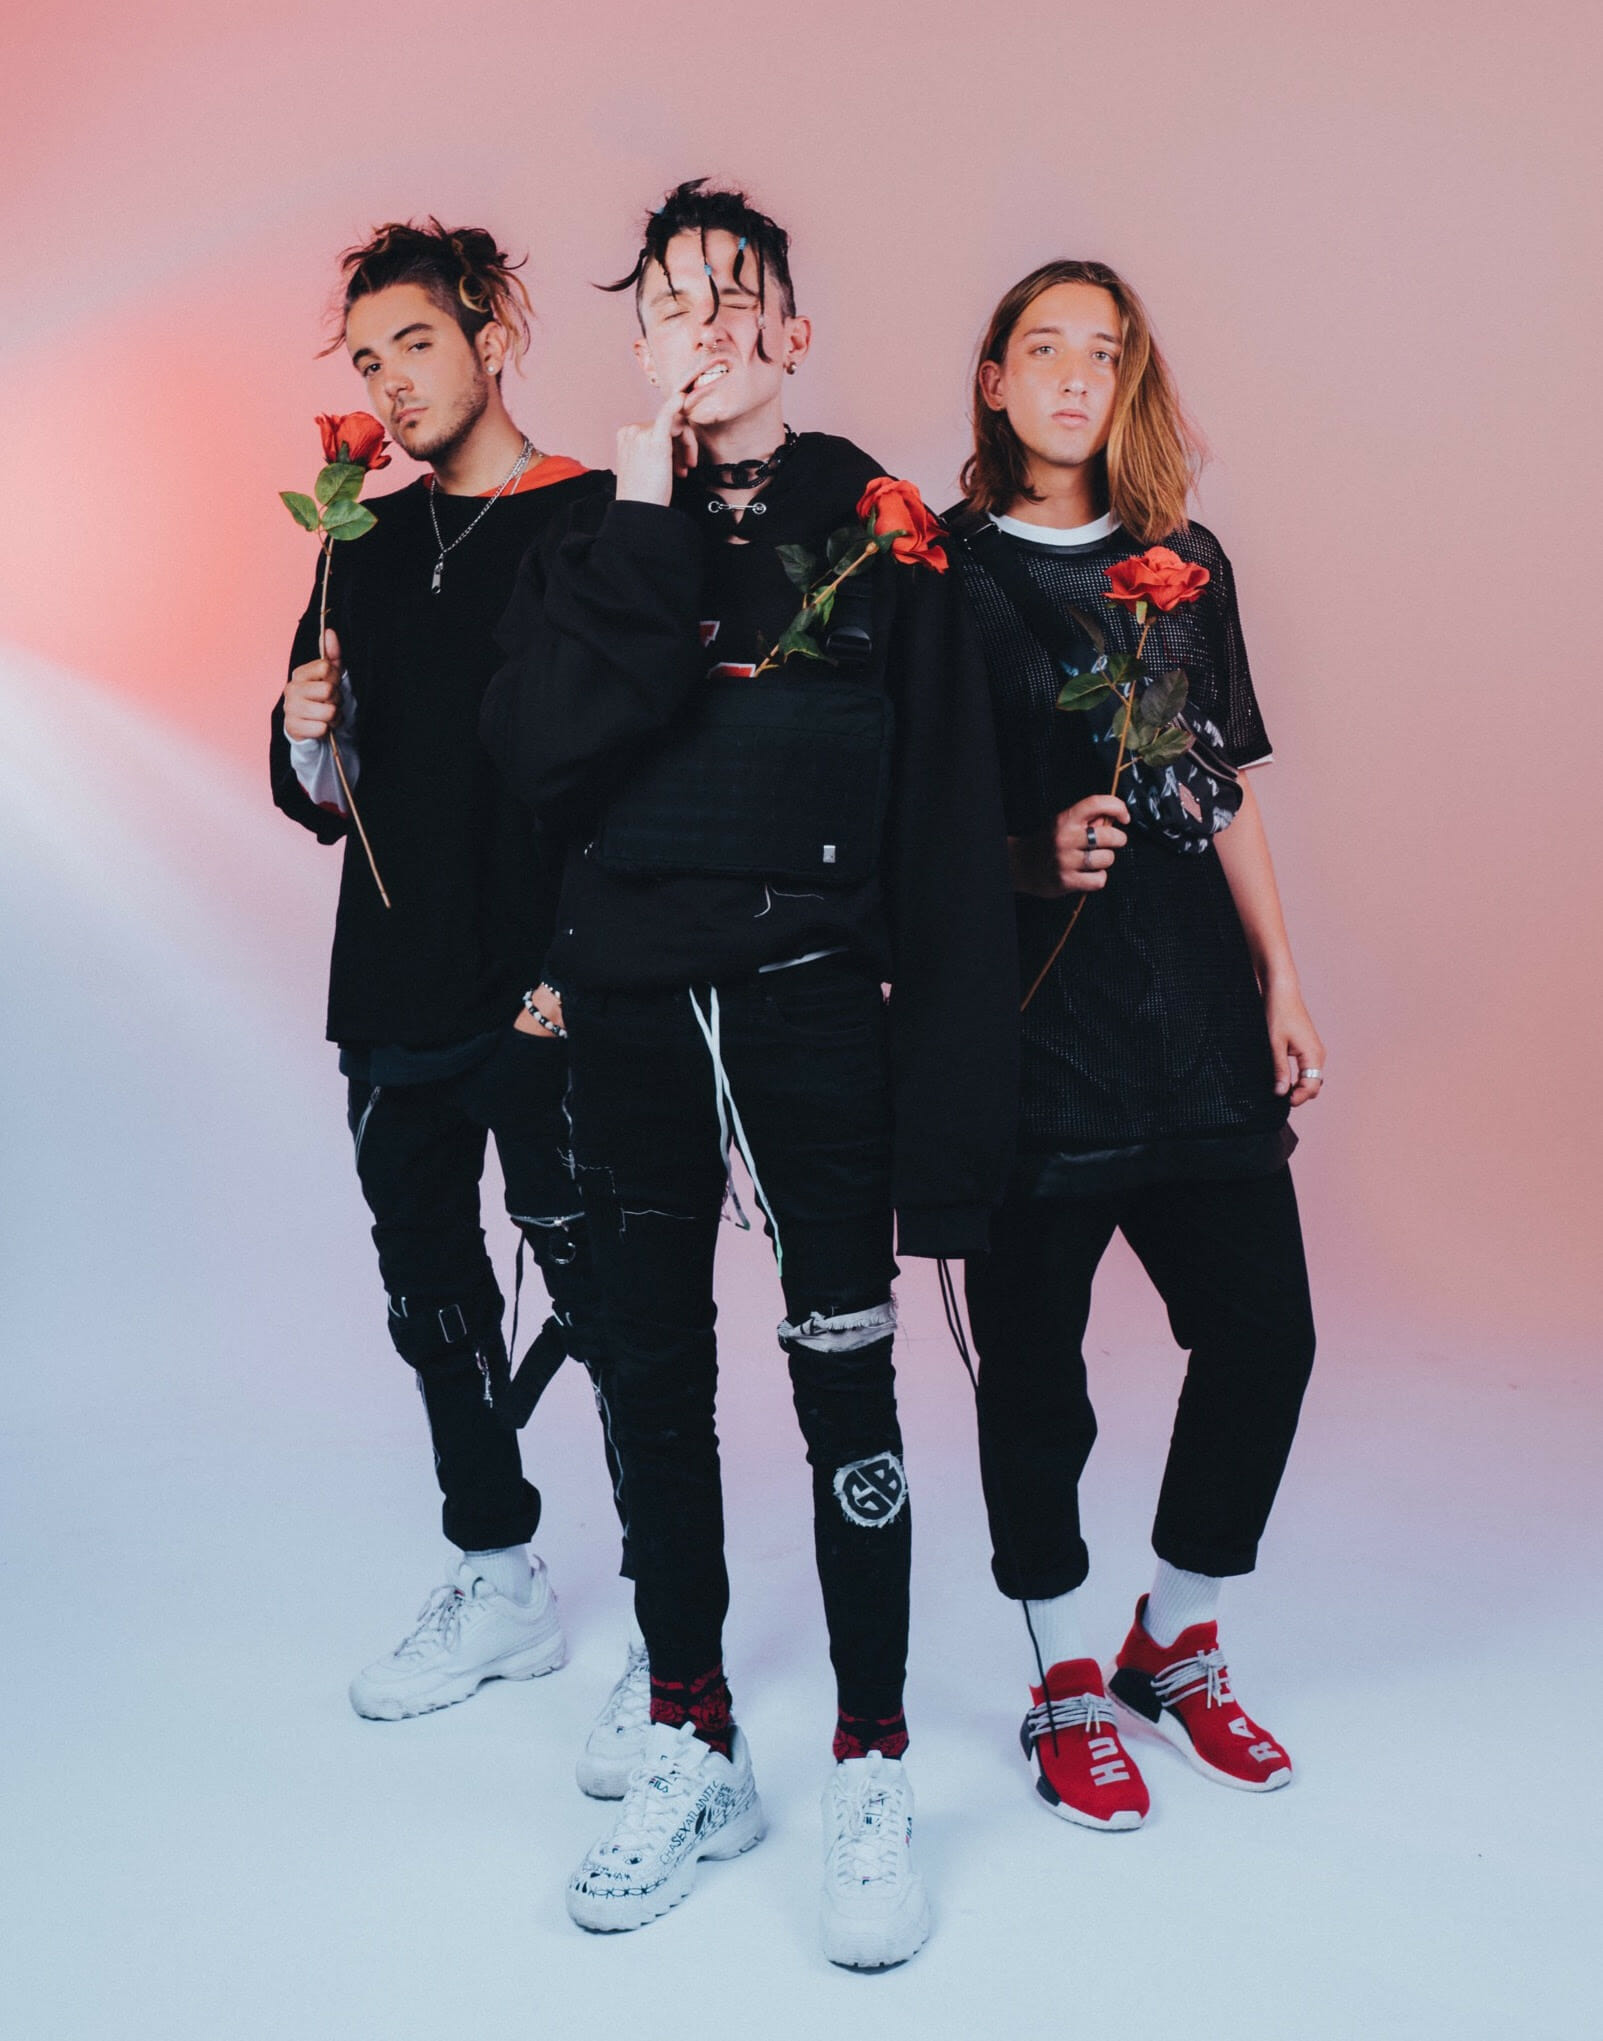 Chase Atlantic show us tour life with “Like a Rockstar” video